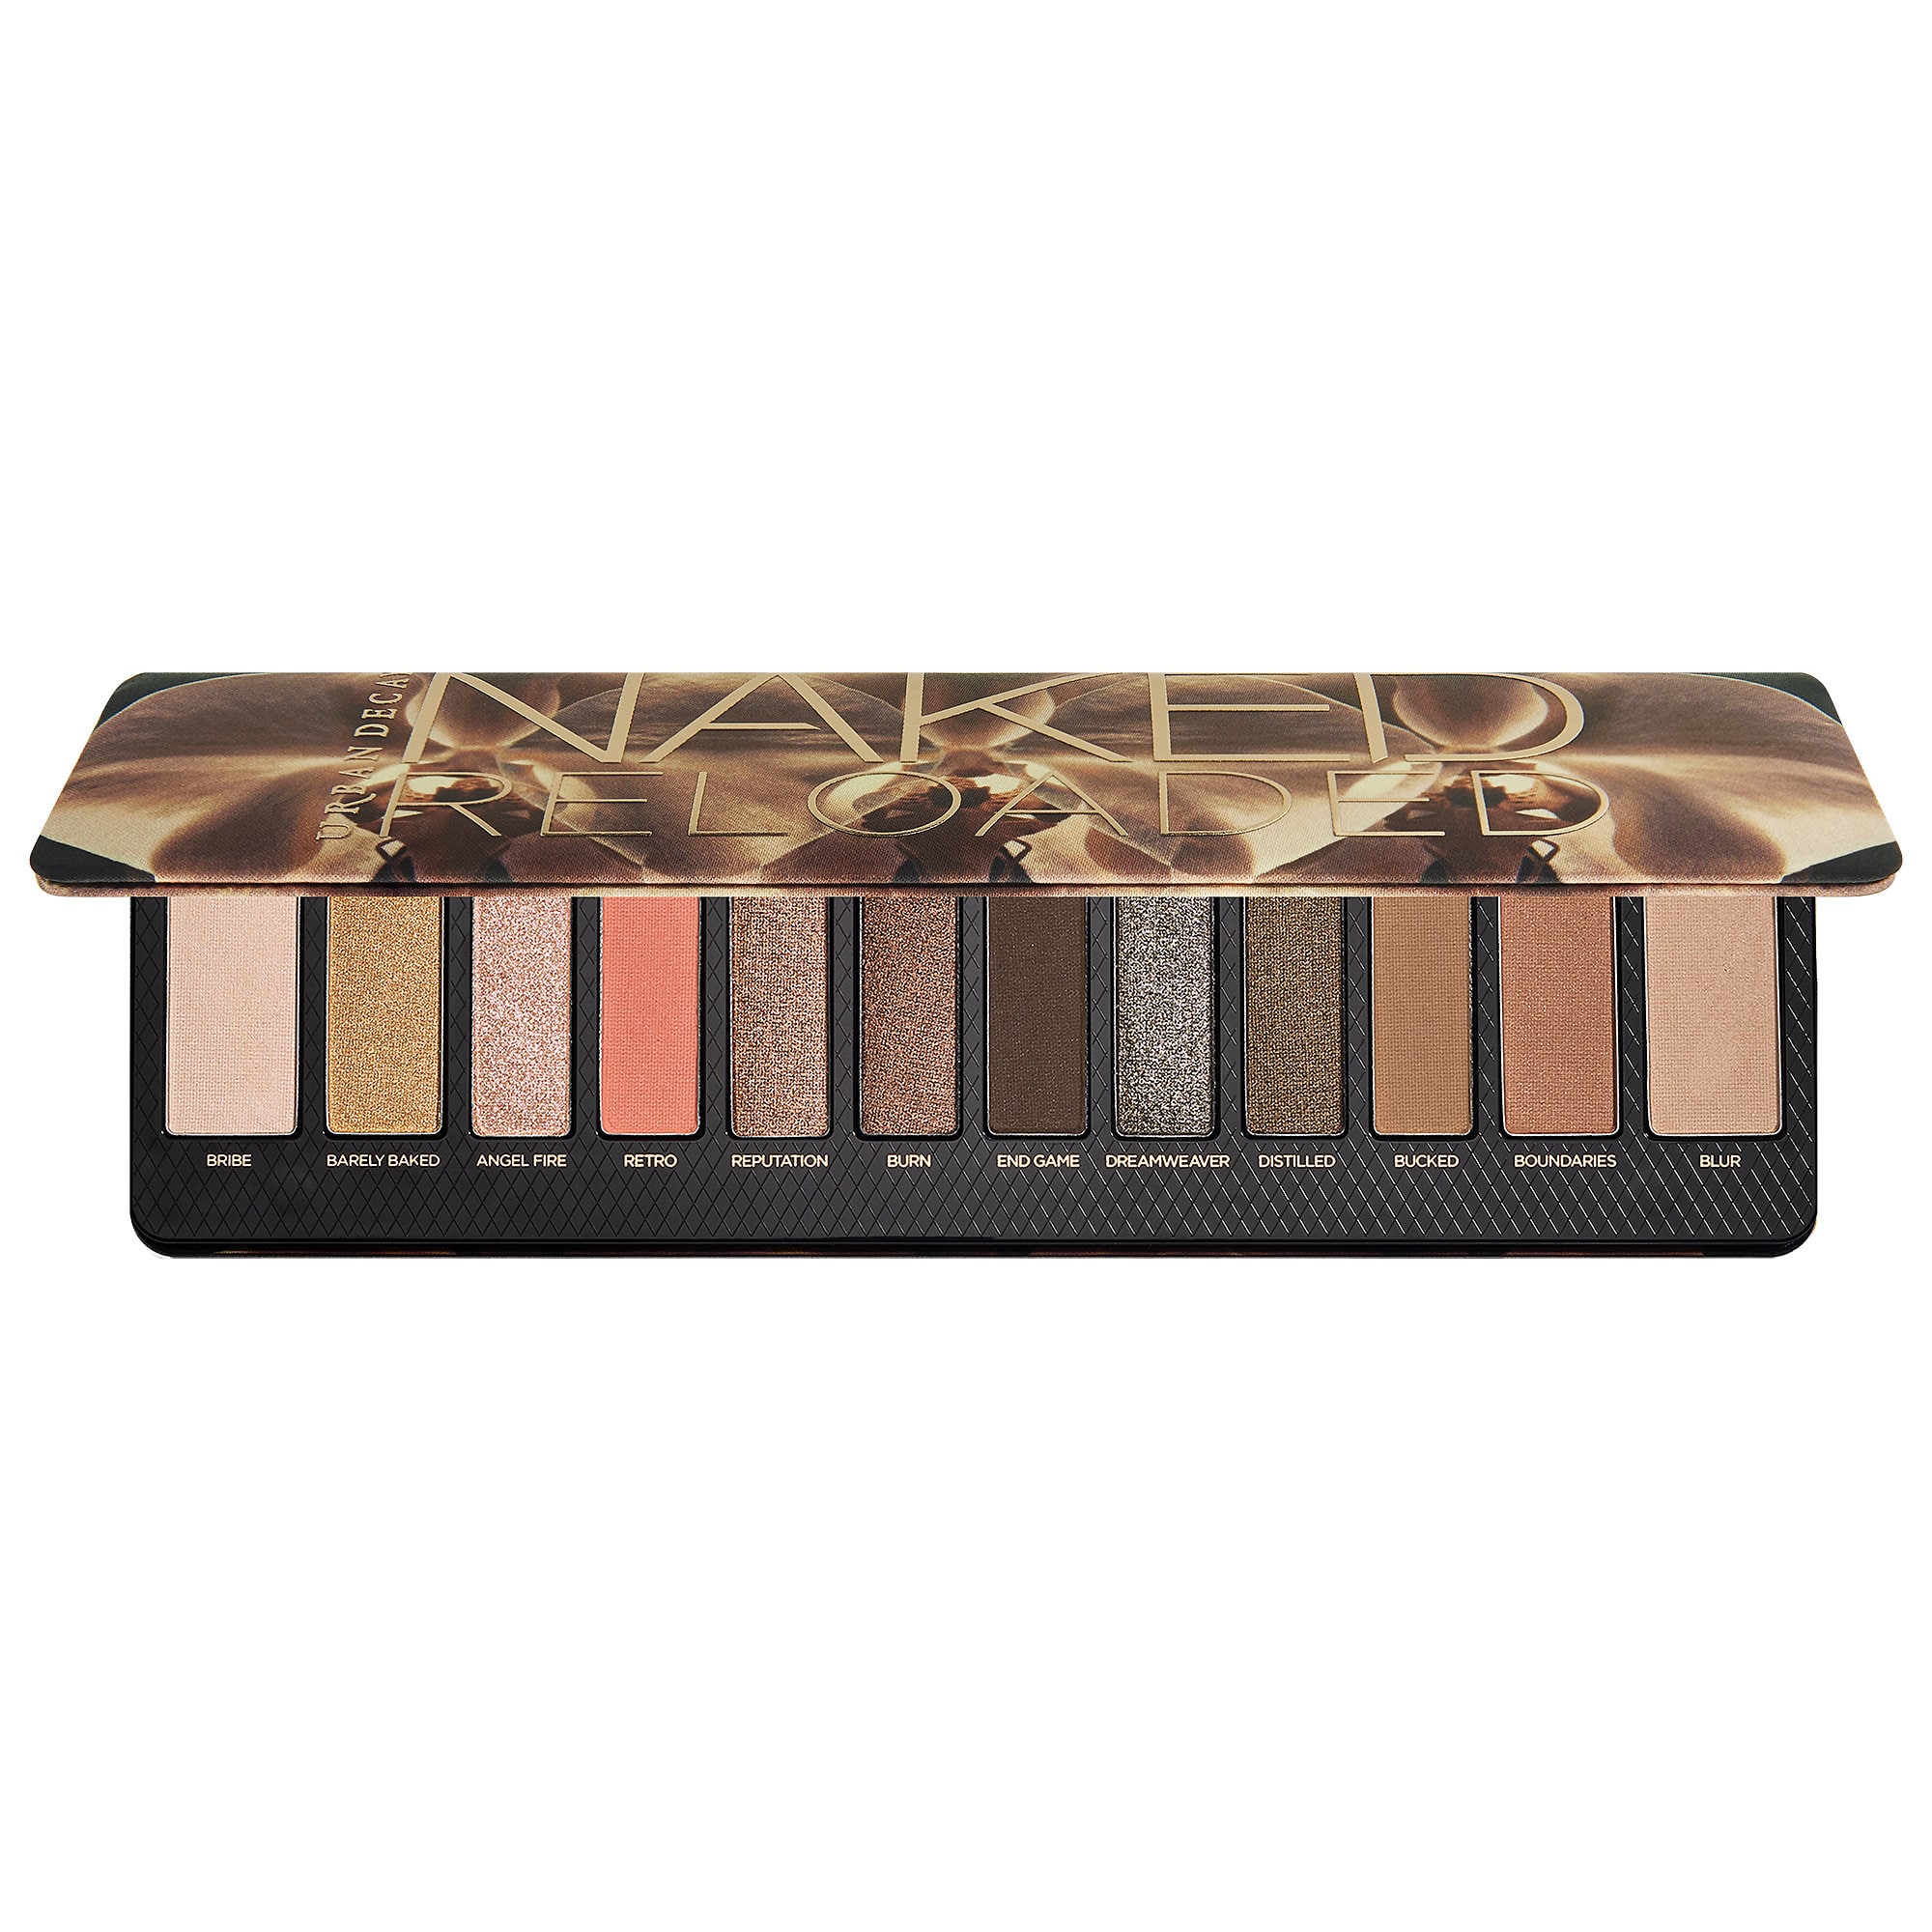 URBAN DECAY Naked Reloaded Eyeshadow Palette.